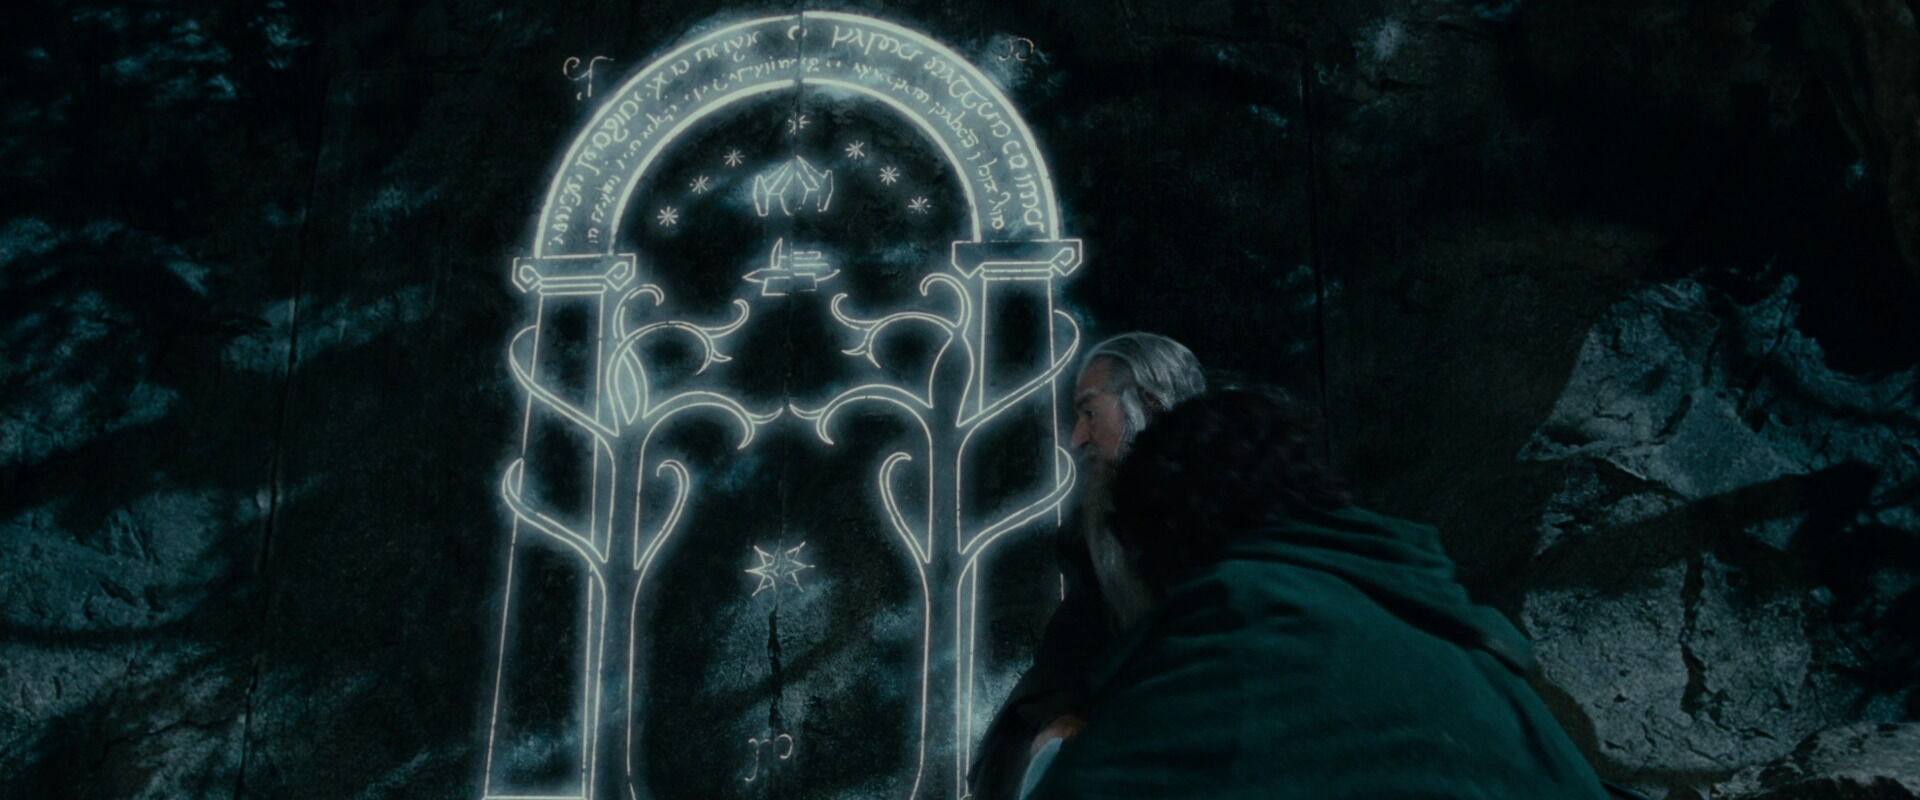 Moria, or Khazad-dûm, was founded by Durin the Deathless.